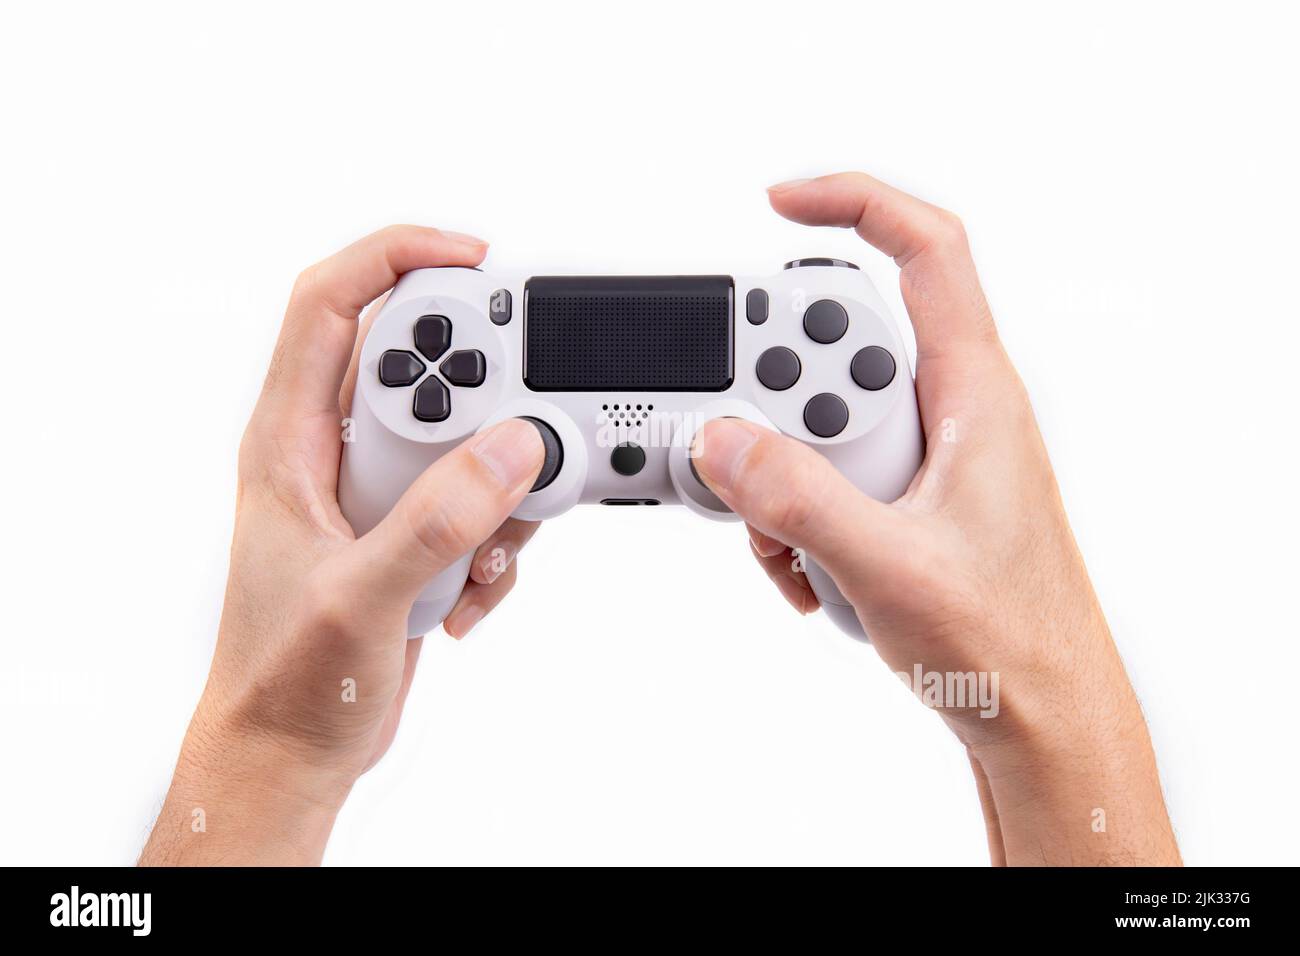 Joystick gaming controller in hand isolated on white background , Video game console developed Interactive Entertainment Stock Photo